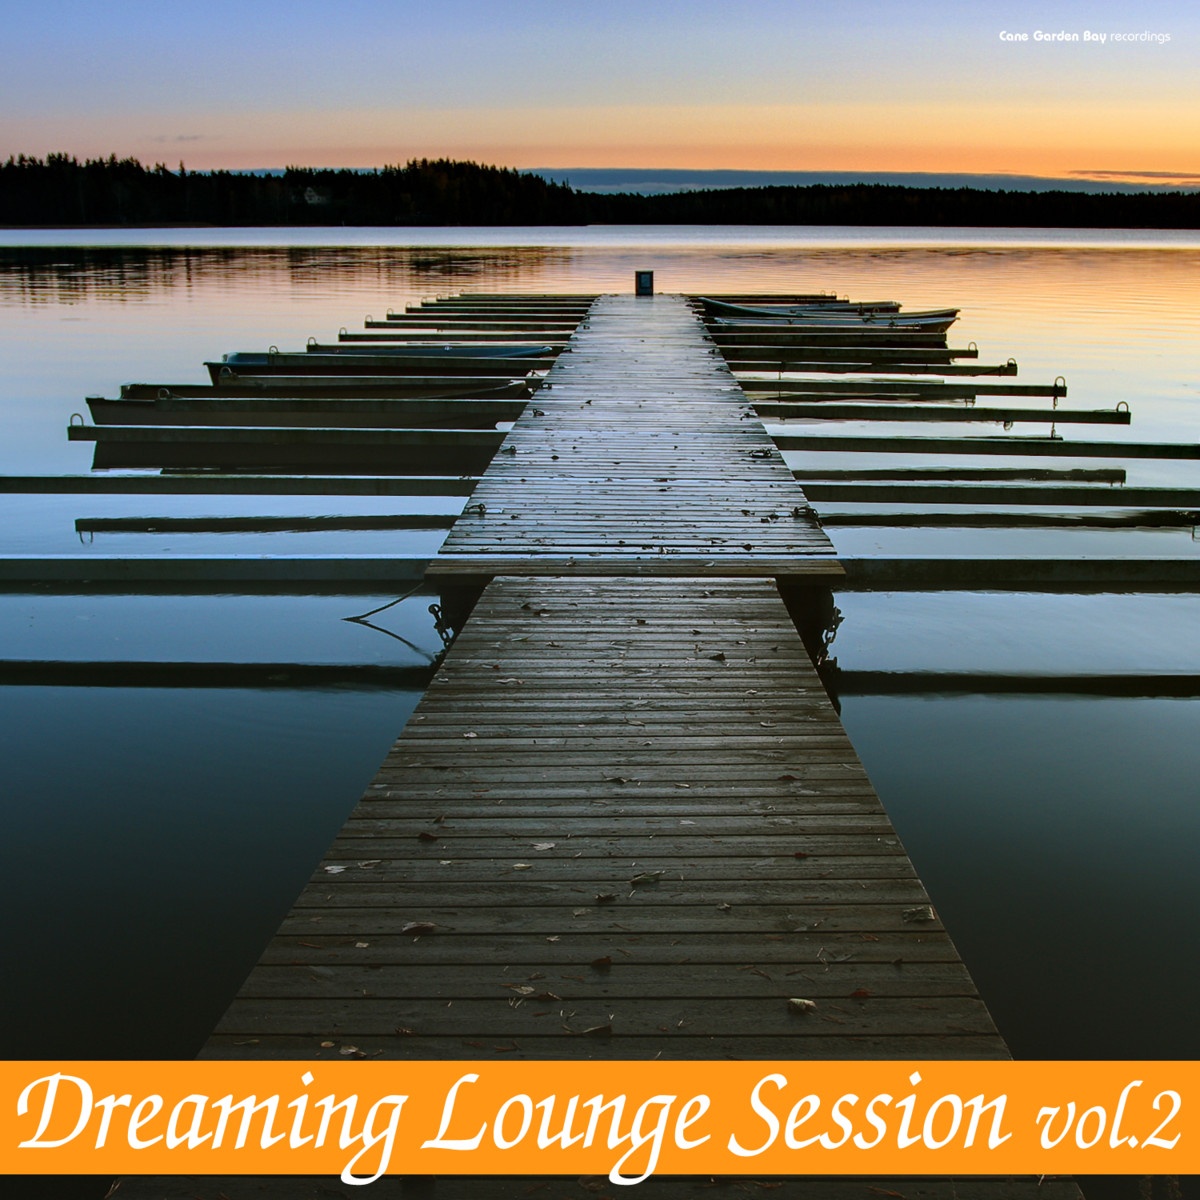 Dreaming Lounge Session, Vol. 2